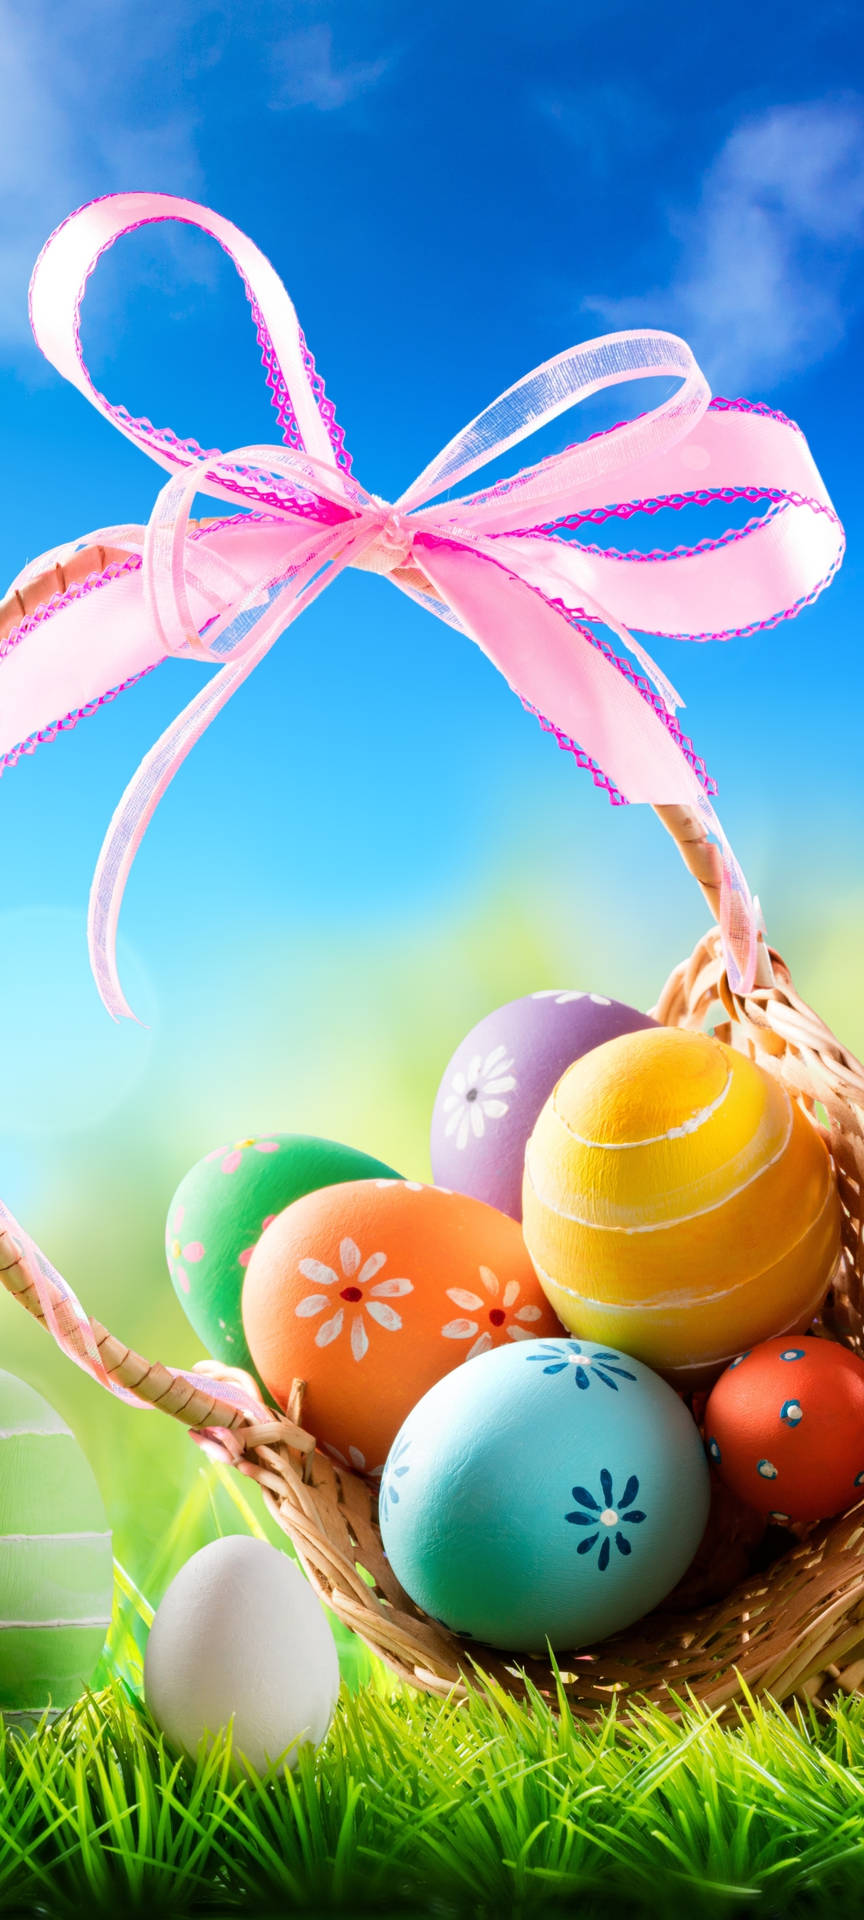 Spread love and joy this Easter season Wallpaper